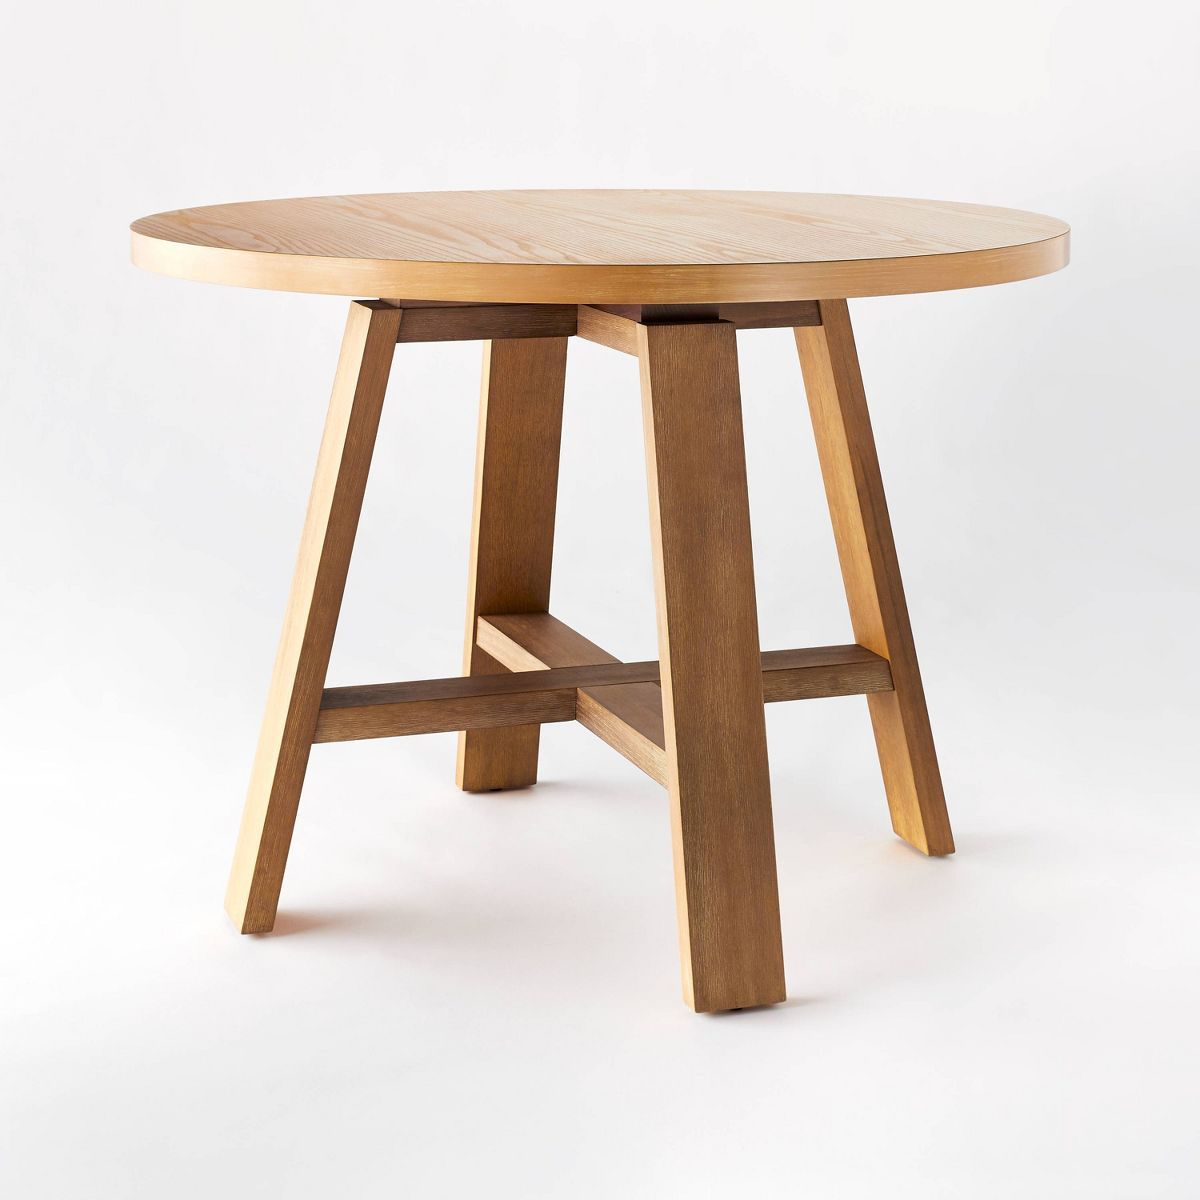 42" Linden Round Wood Dining Table Natural - Threshold™ designed with Studio McGee | Target